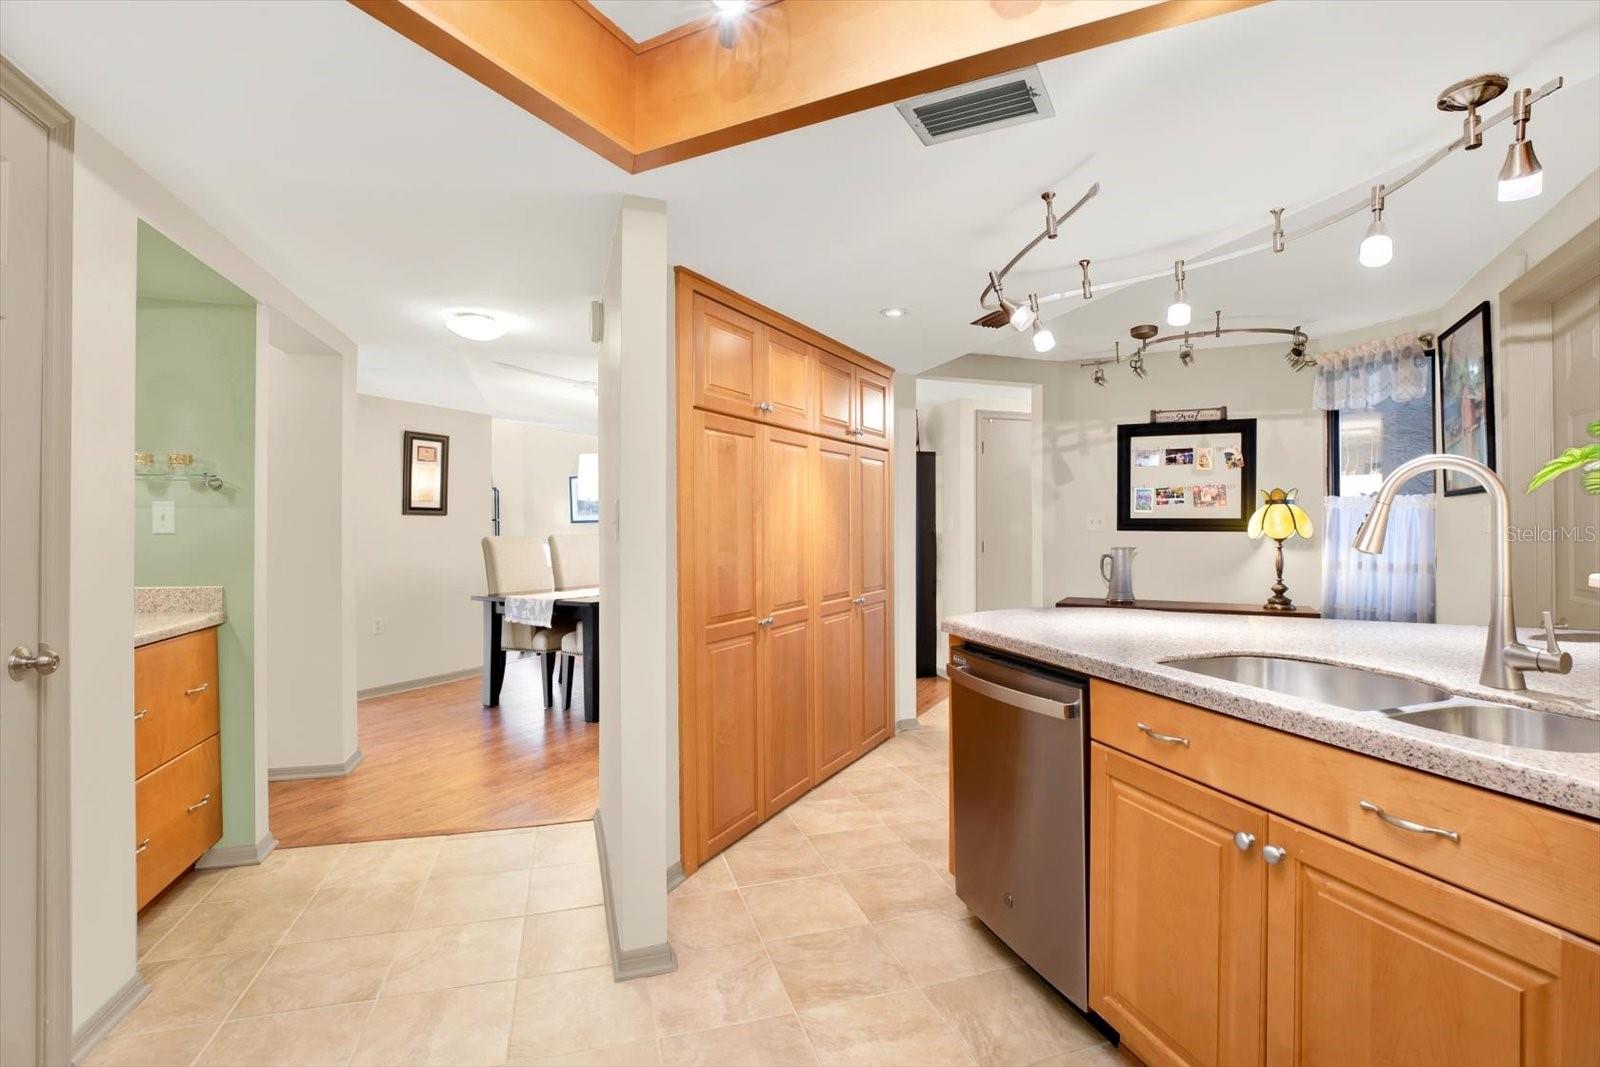 The kitchen has a double pantry storage and a wet bar.